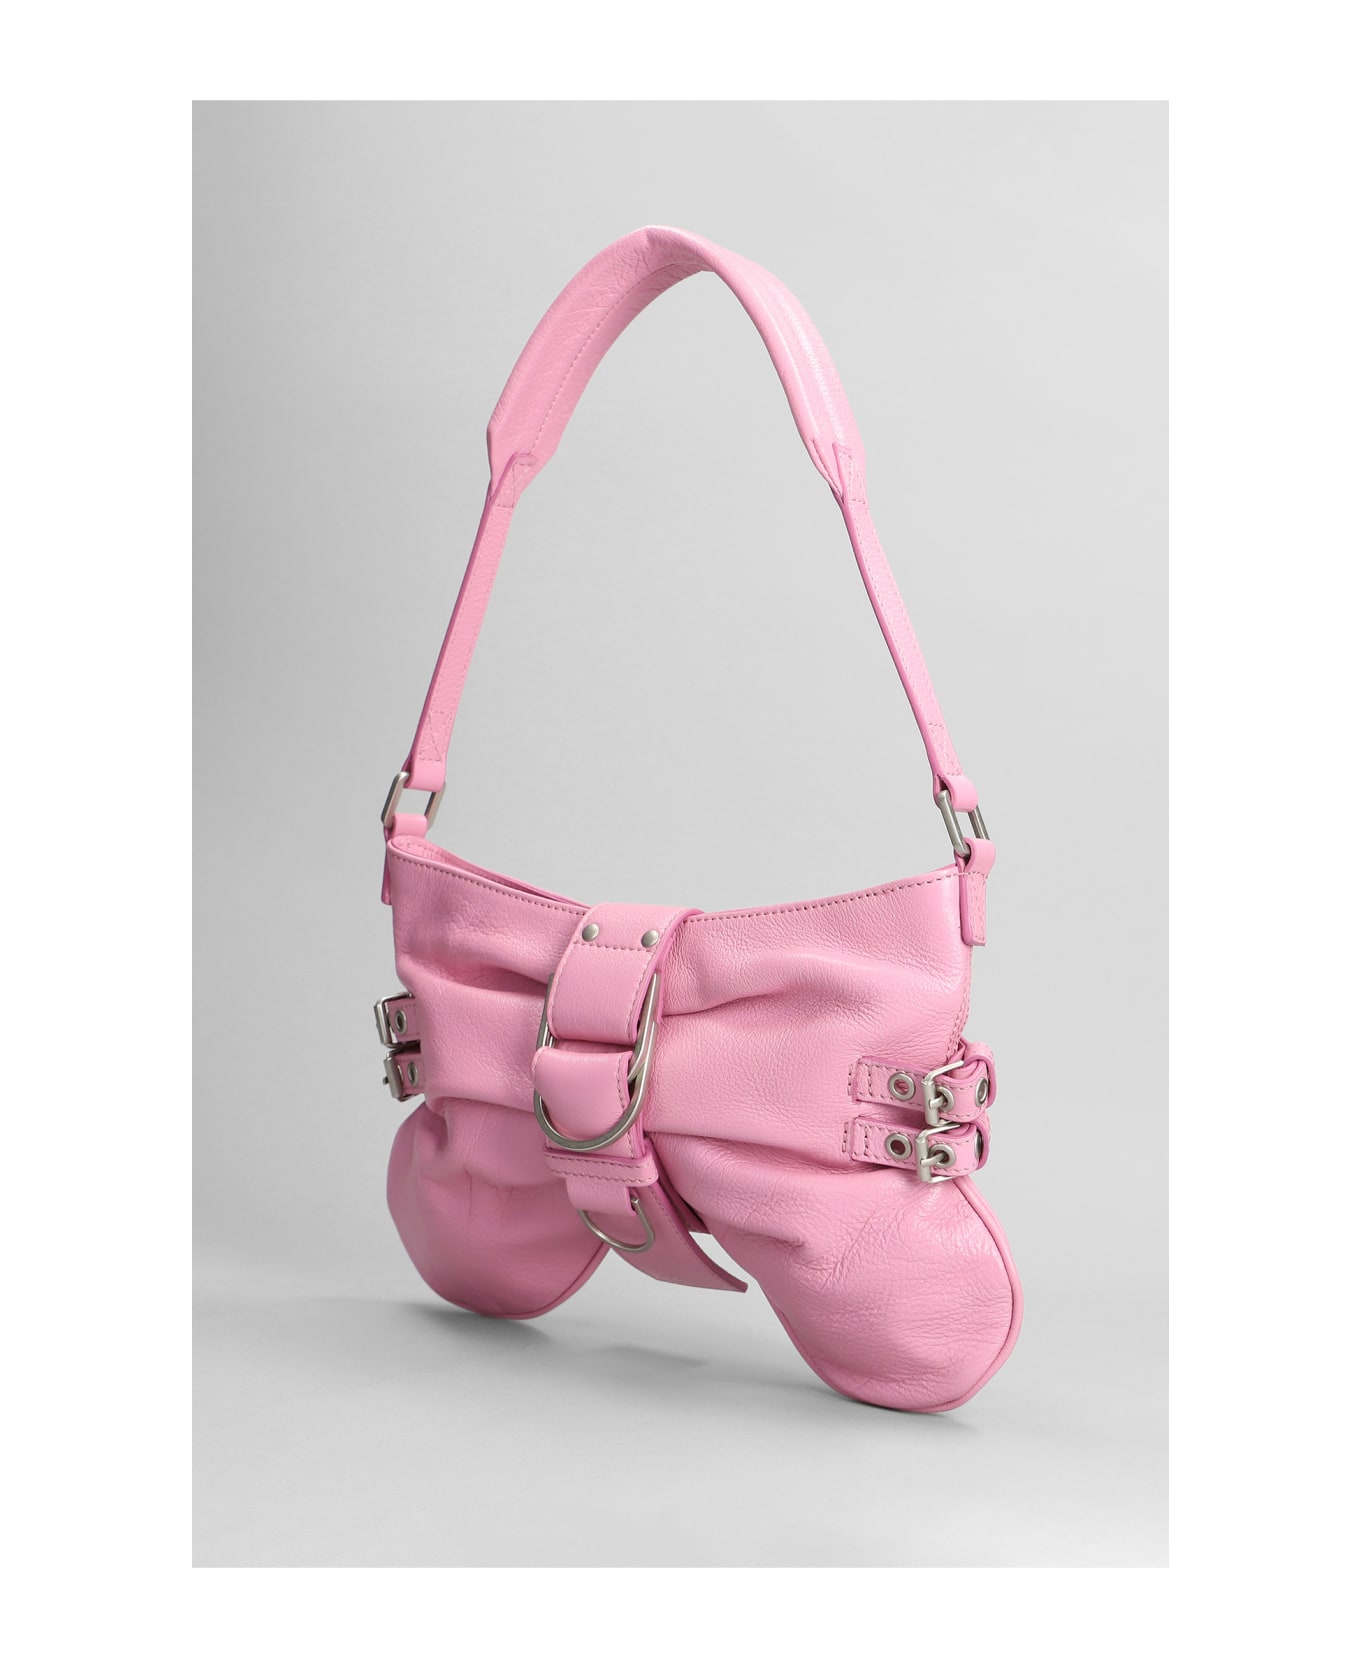 Blumarine Hand Bag In Rose-pink Leather - Pink